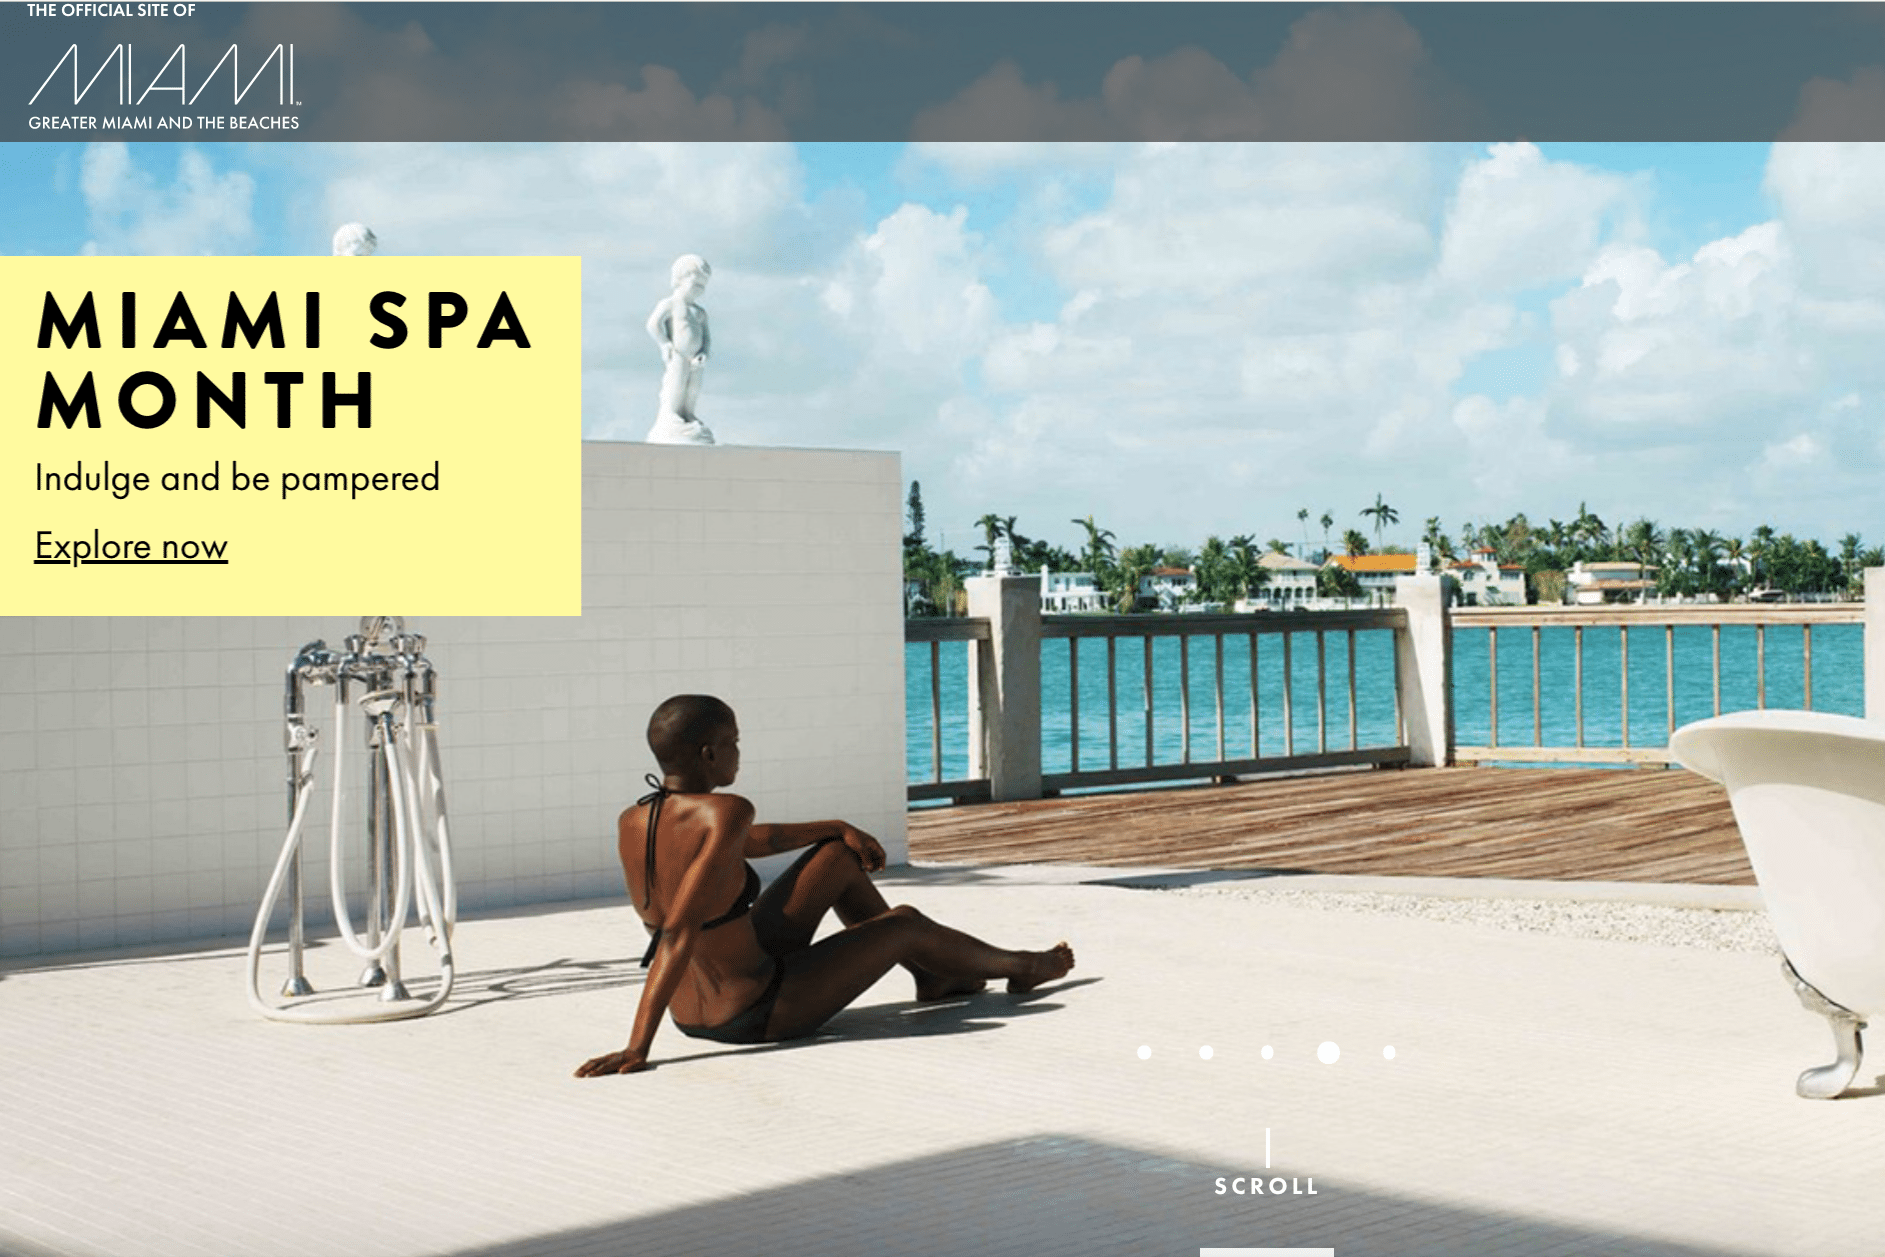 Miami recently redesigned its site to let users hyper-personalize their experience.